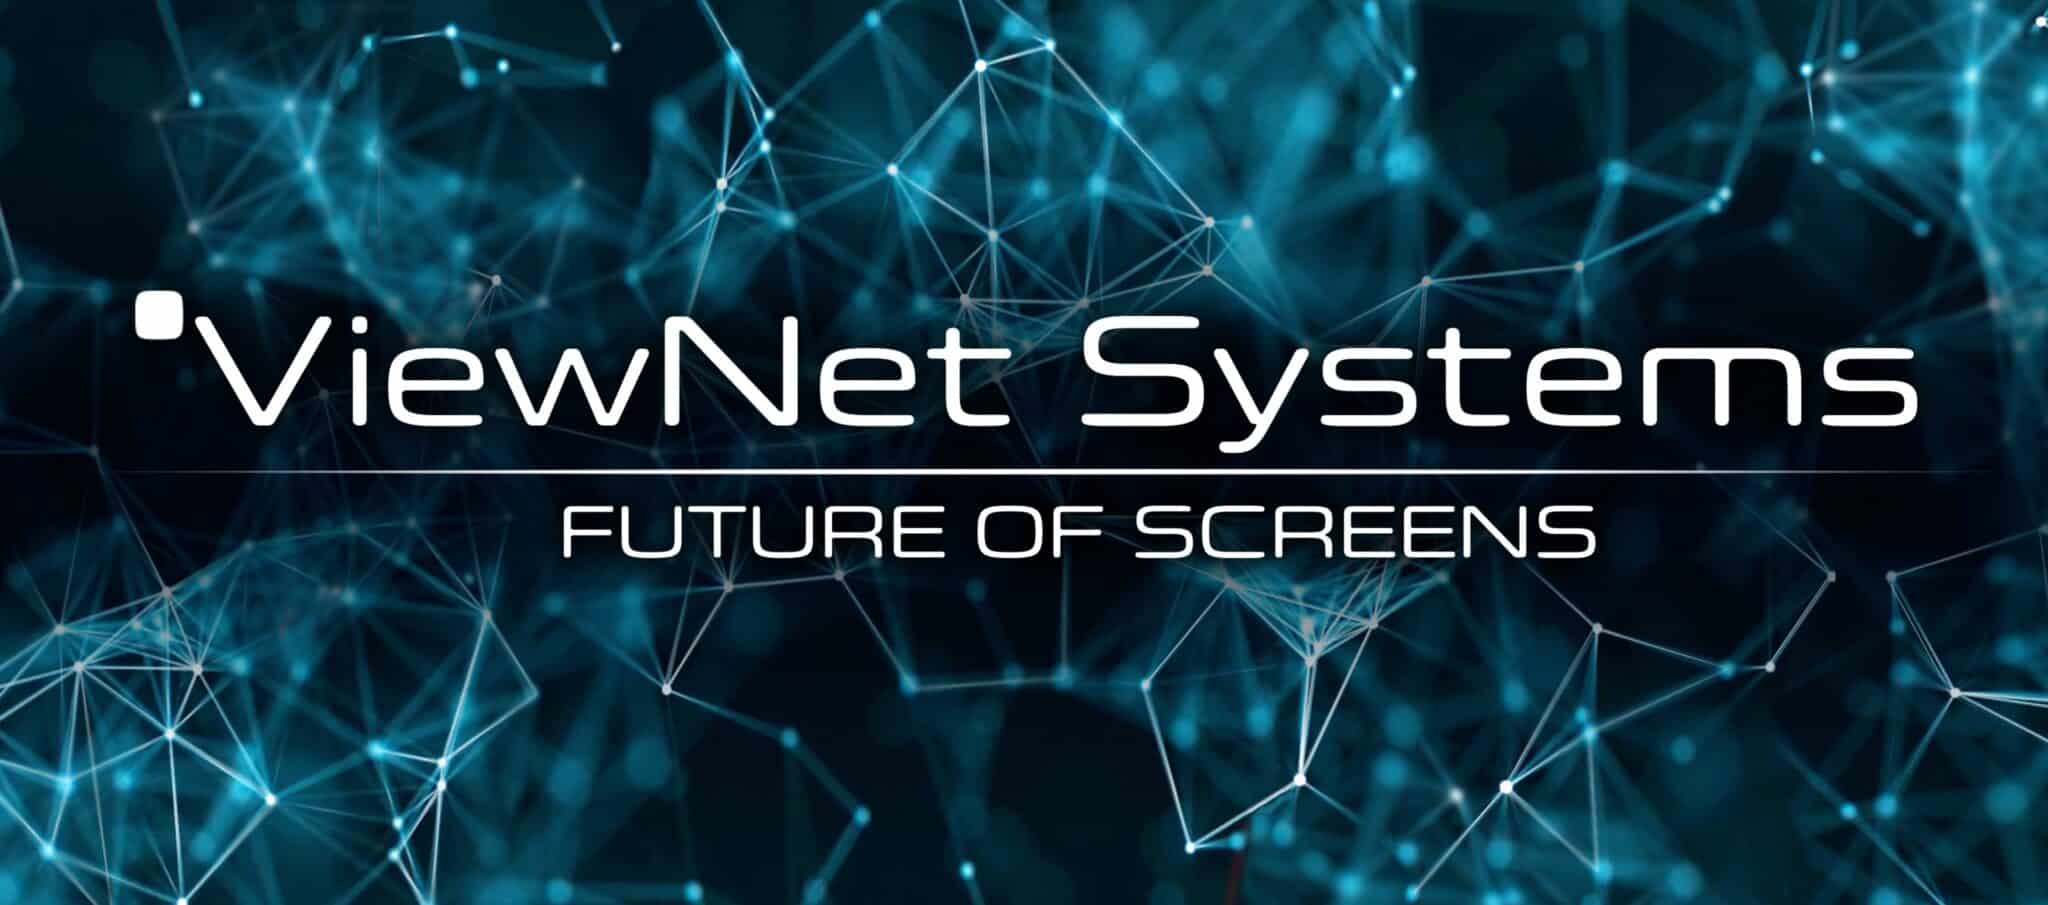 Viewnet Systems Future of Screens